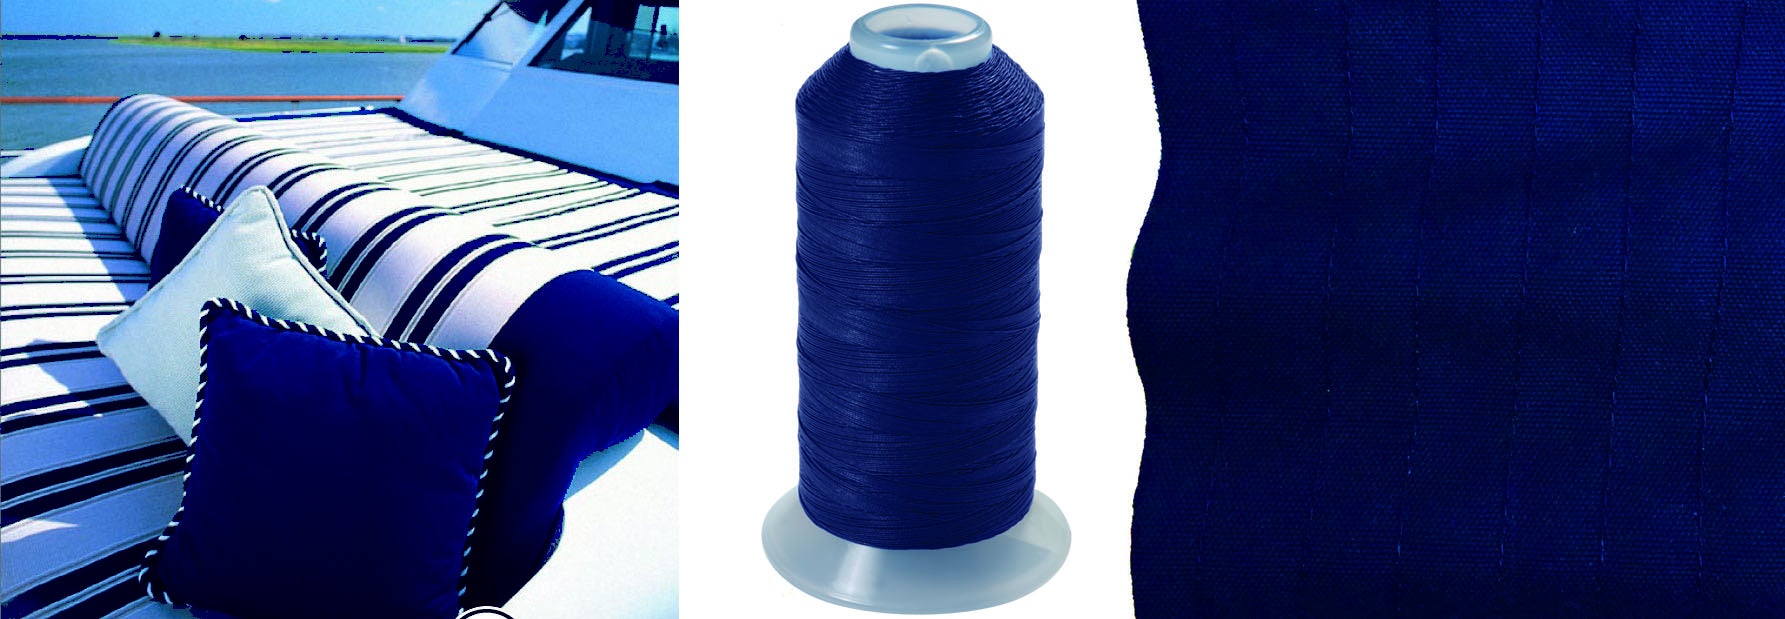 New Navy Blue GORE® TENARA® Sewing Thread Is The Perfect Match For